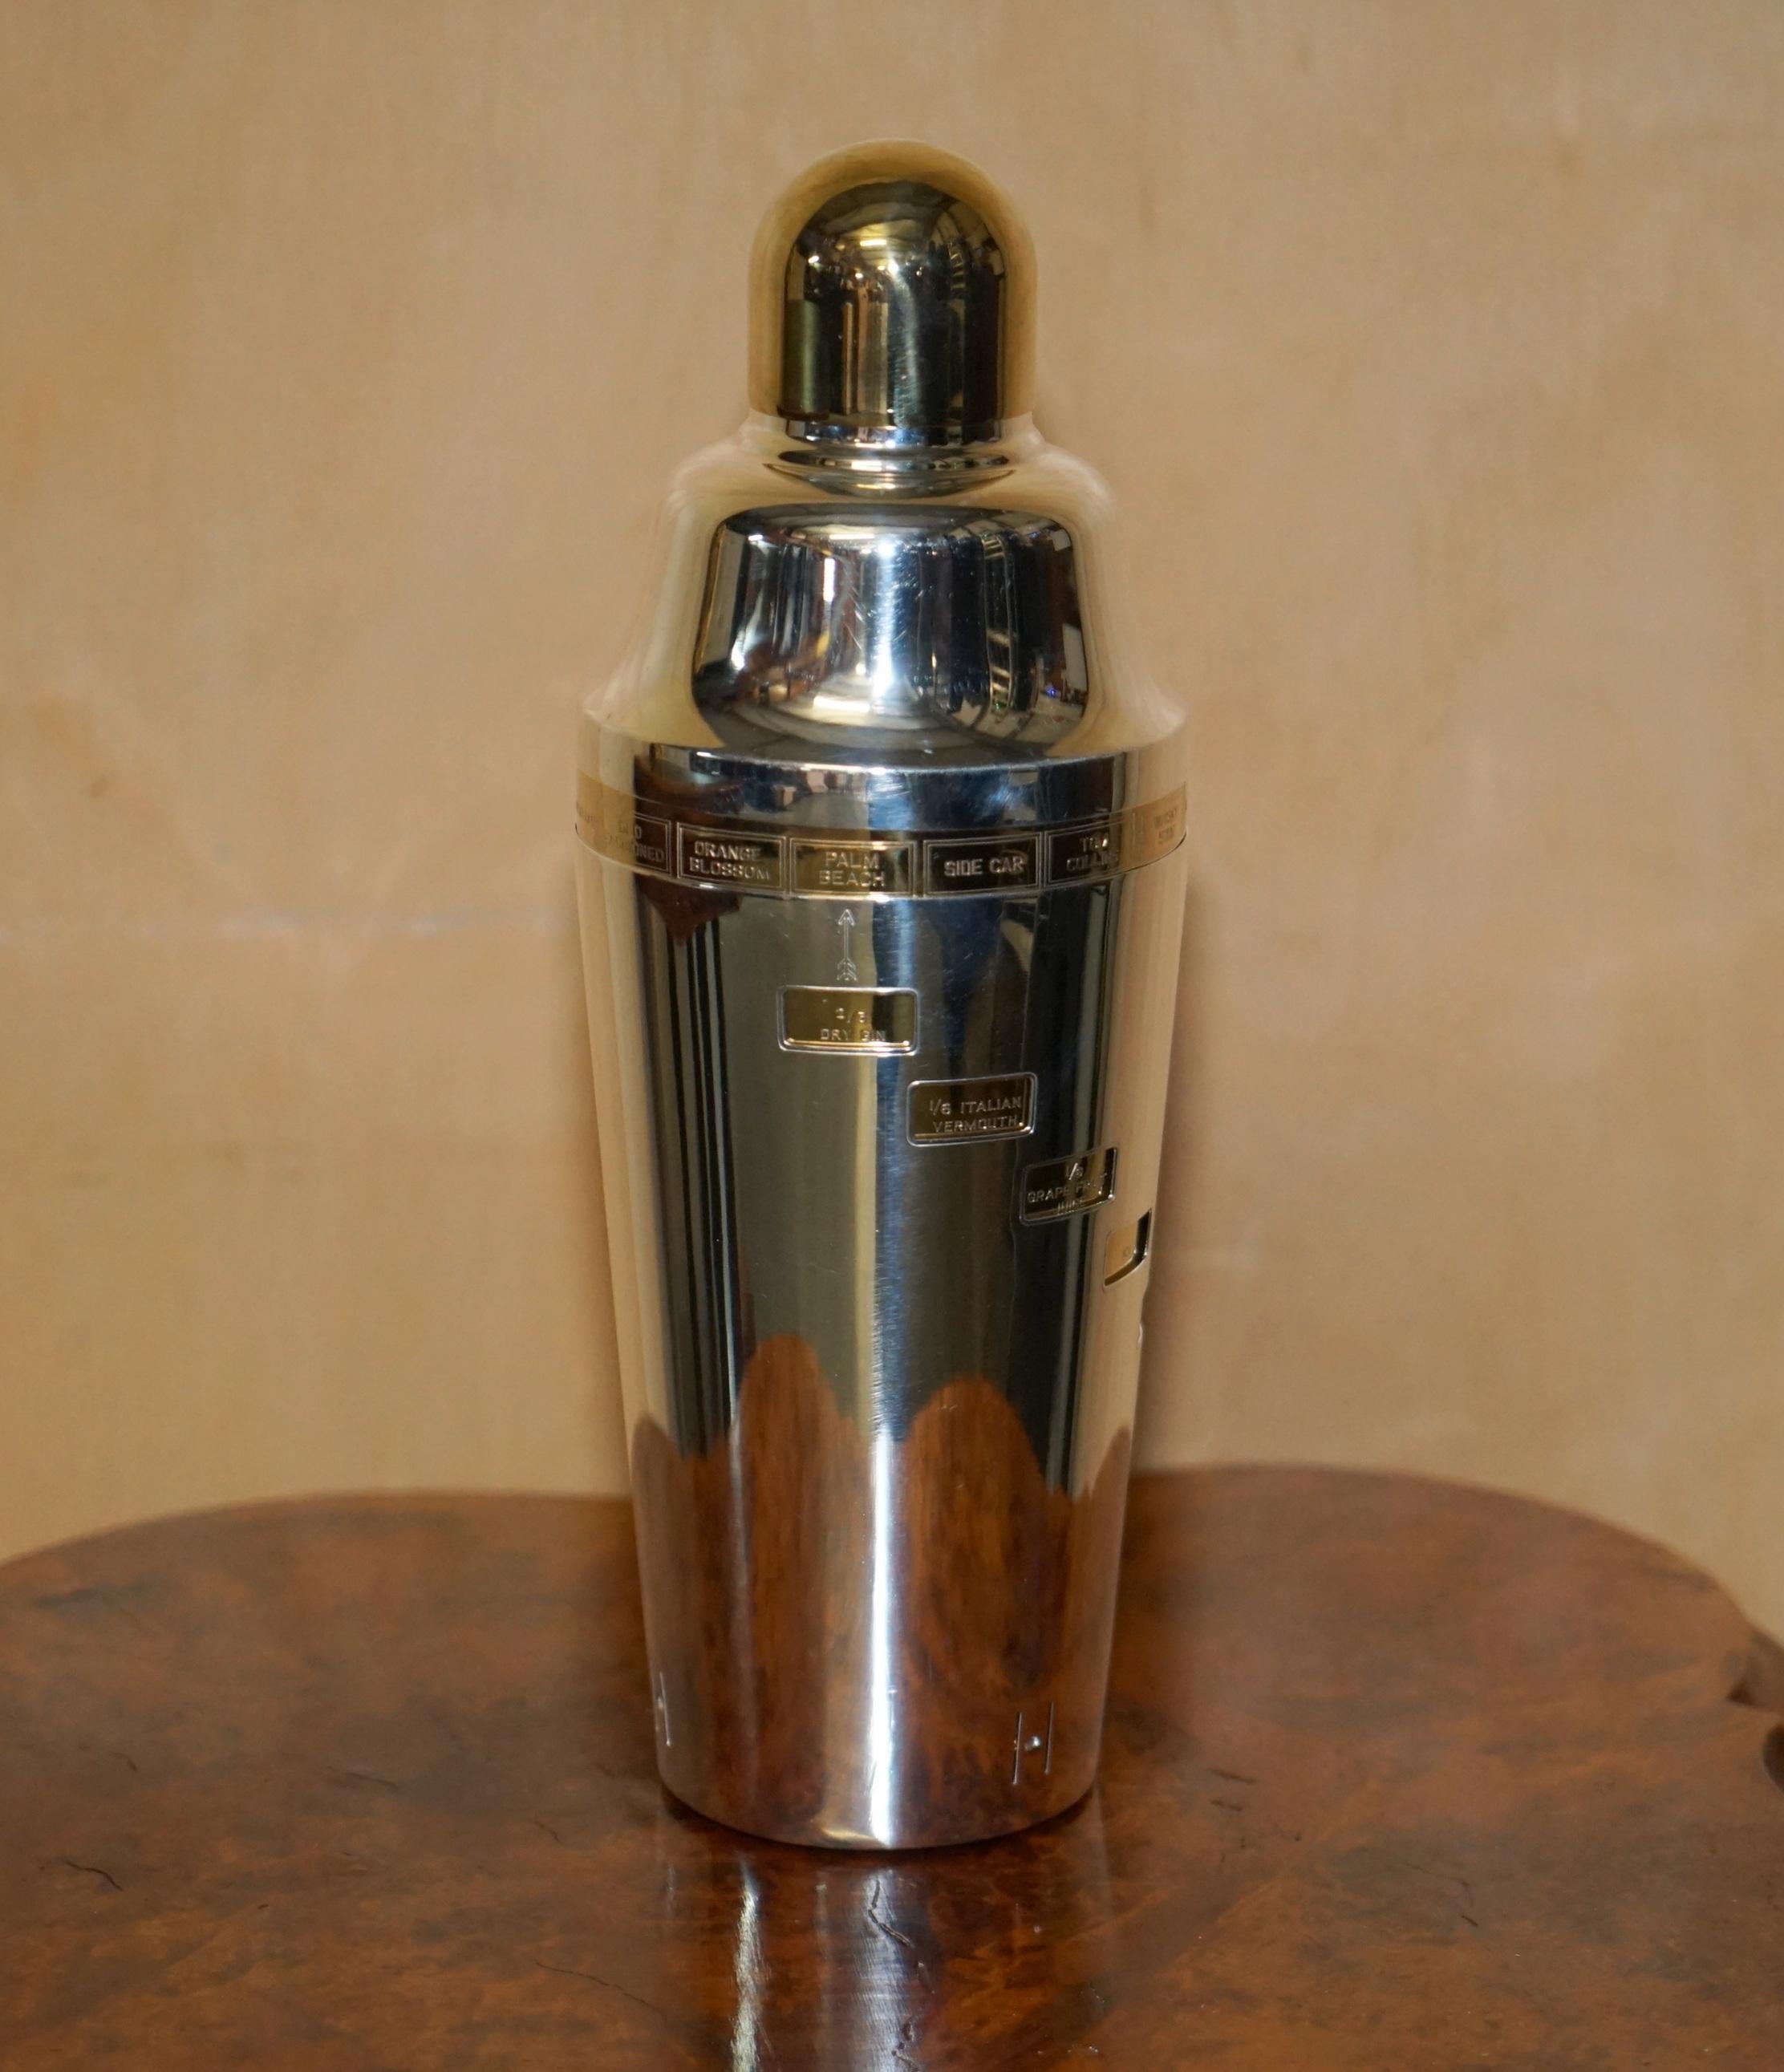 We are delighted to offer for sale this rather lovely, fully restored 1930’s Art Deco Napier US made “Tells you how” cocktail shaker making 15 cocktails.

This is pretty much the finest example in the world you will ever see of this cocktail